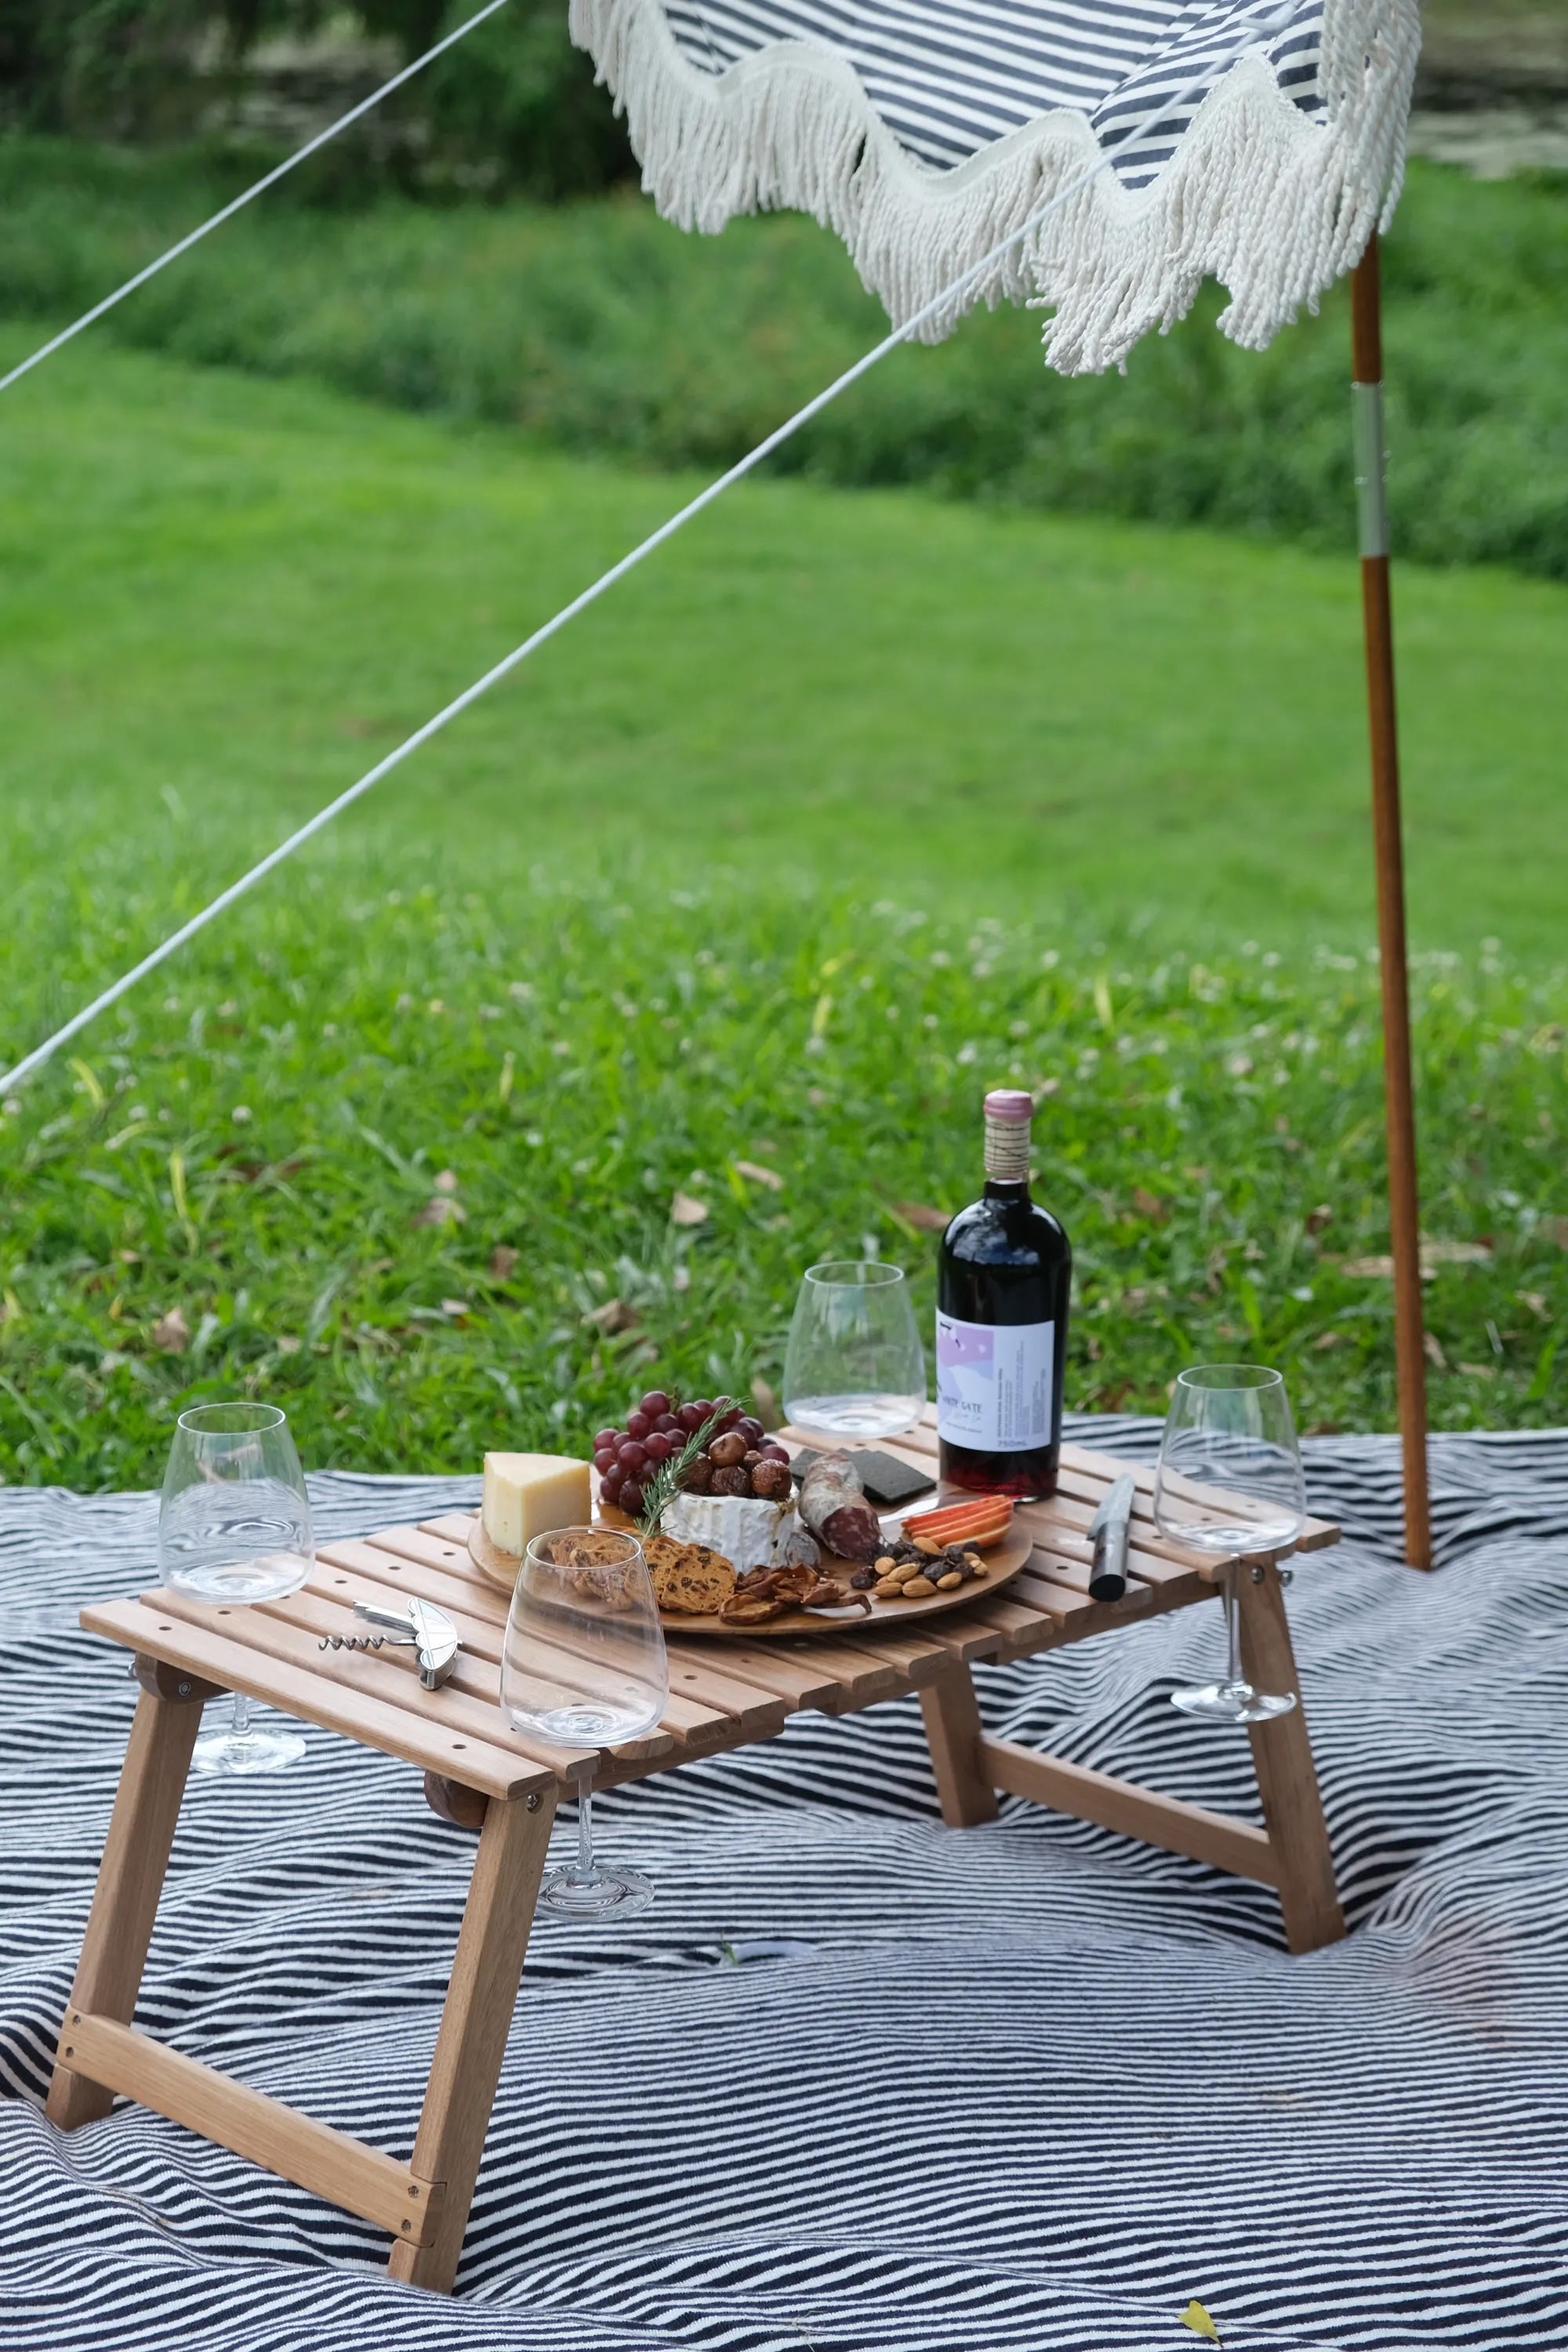 picnic table with food and wine